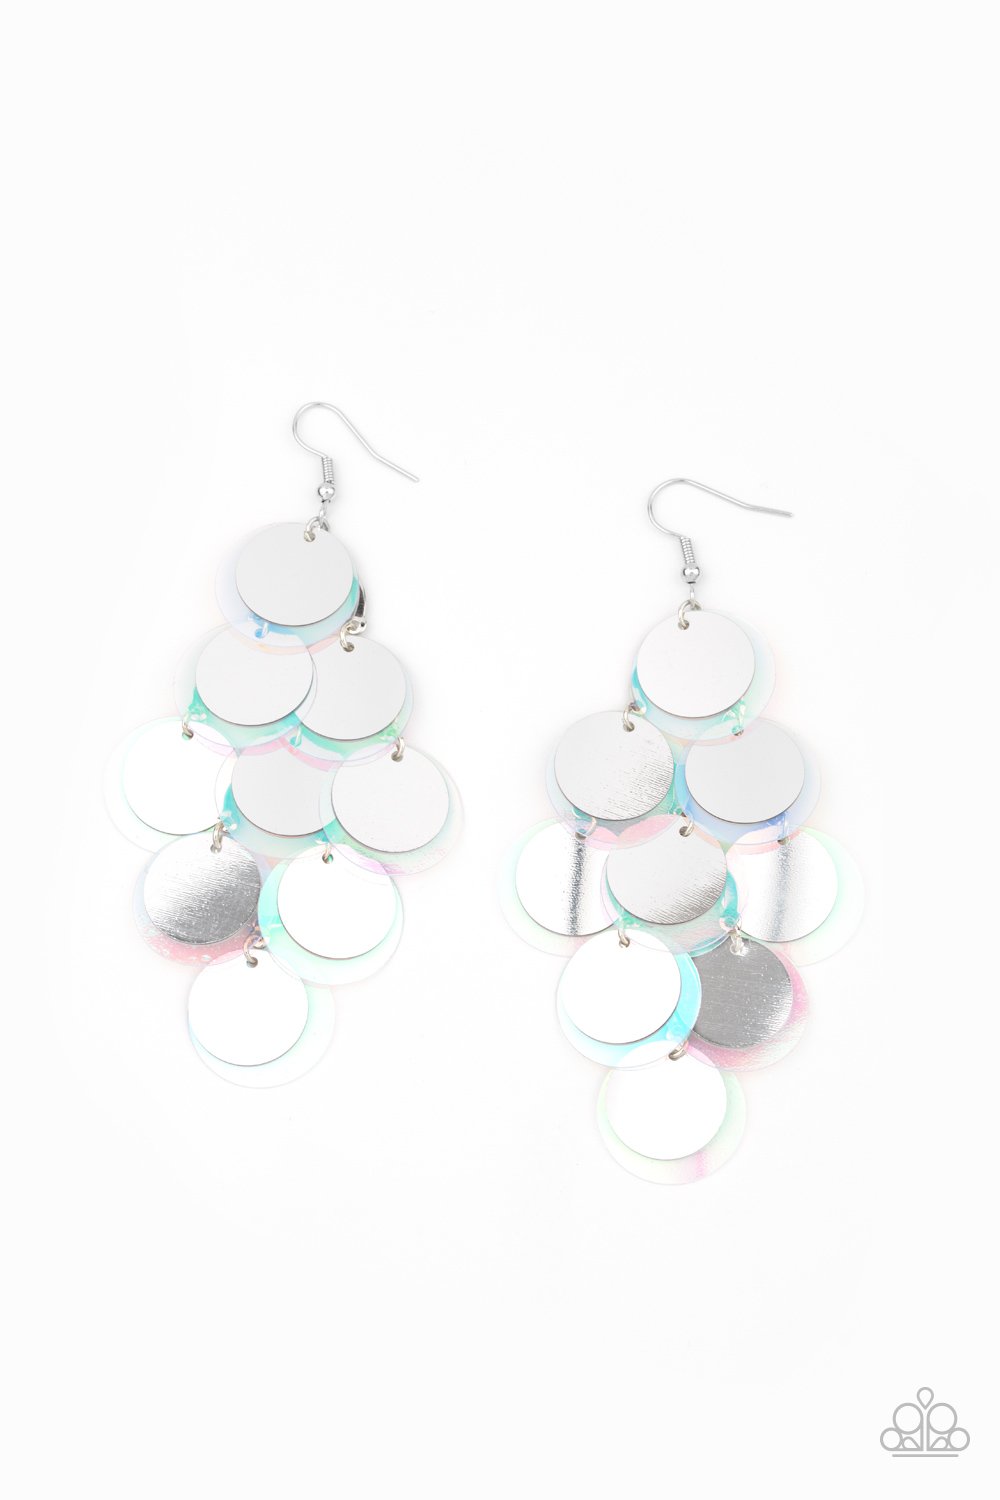 &lt;p&gt; A bubbly collection of oversized silver and iridescent sequins cascade from the ear, creating a flirty holographic fringe. Earring attaches to a standard fishhook fitting.
&lt;/p&gt;  

&lt;p&gt; &lt;i&gt;  Sold as one pair of earrings. &lt;/i&gt;  &lt;/p&gt;


&lt;img src=\&quot;https://d9b54x484lq62.cloudfront.net/paparazzi/shopping/images/517_tag150x115_1.png\&quot; alt=\&quot;New Kit\&quot; align=\&quot;middle\&quot; height=\&quot;50\&quot; width=\&quot;50\&quot;&gt;